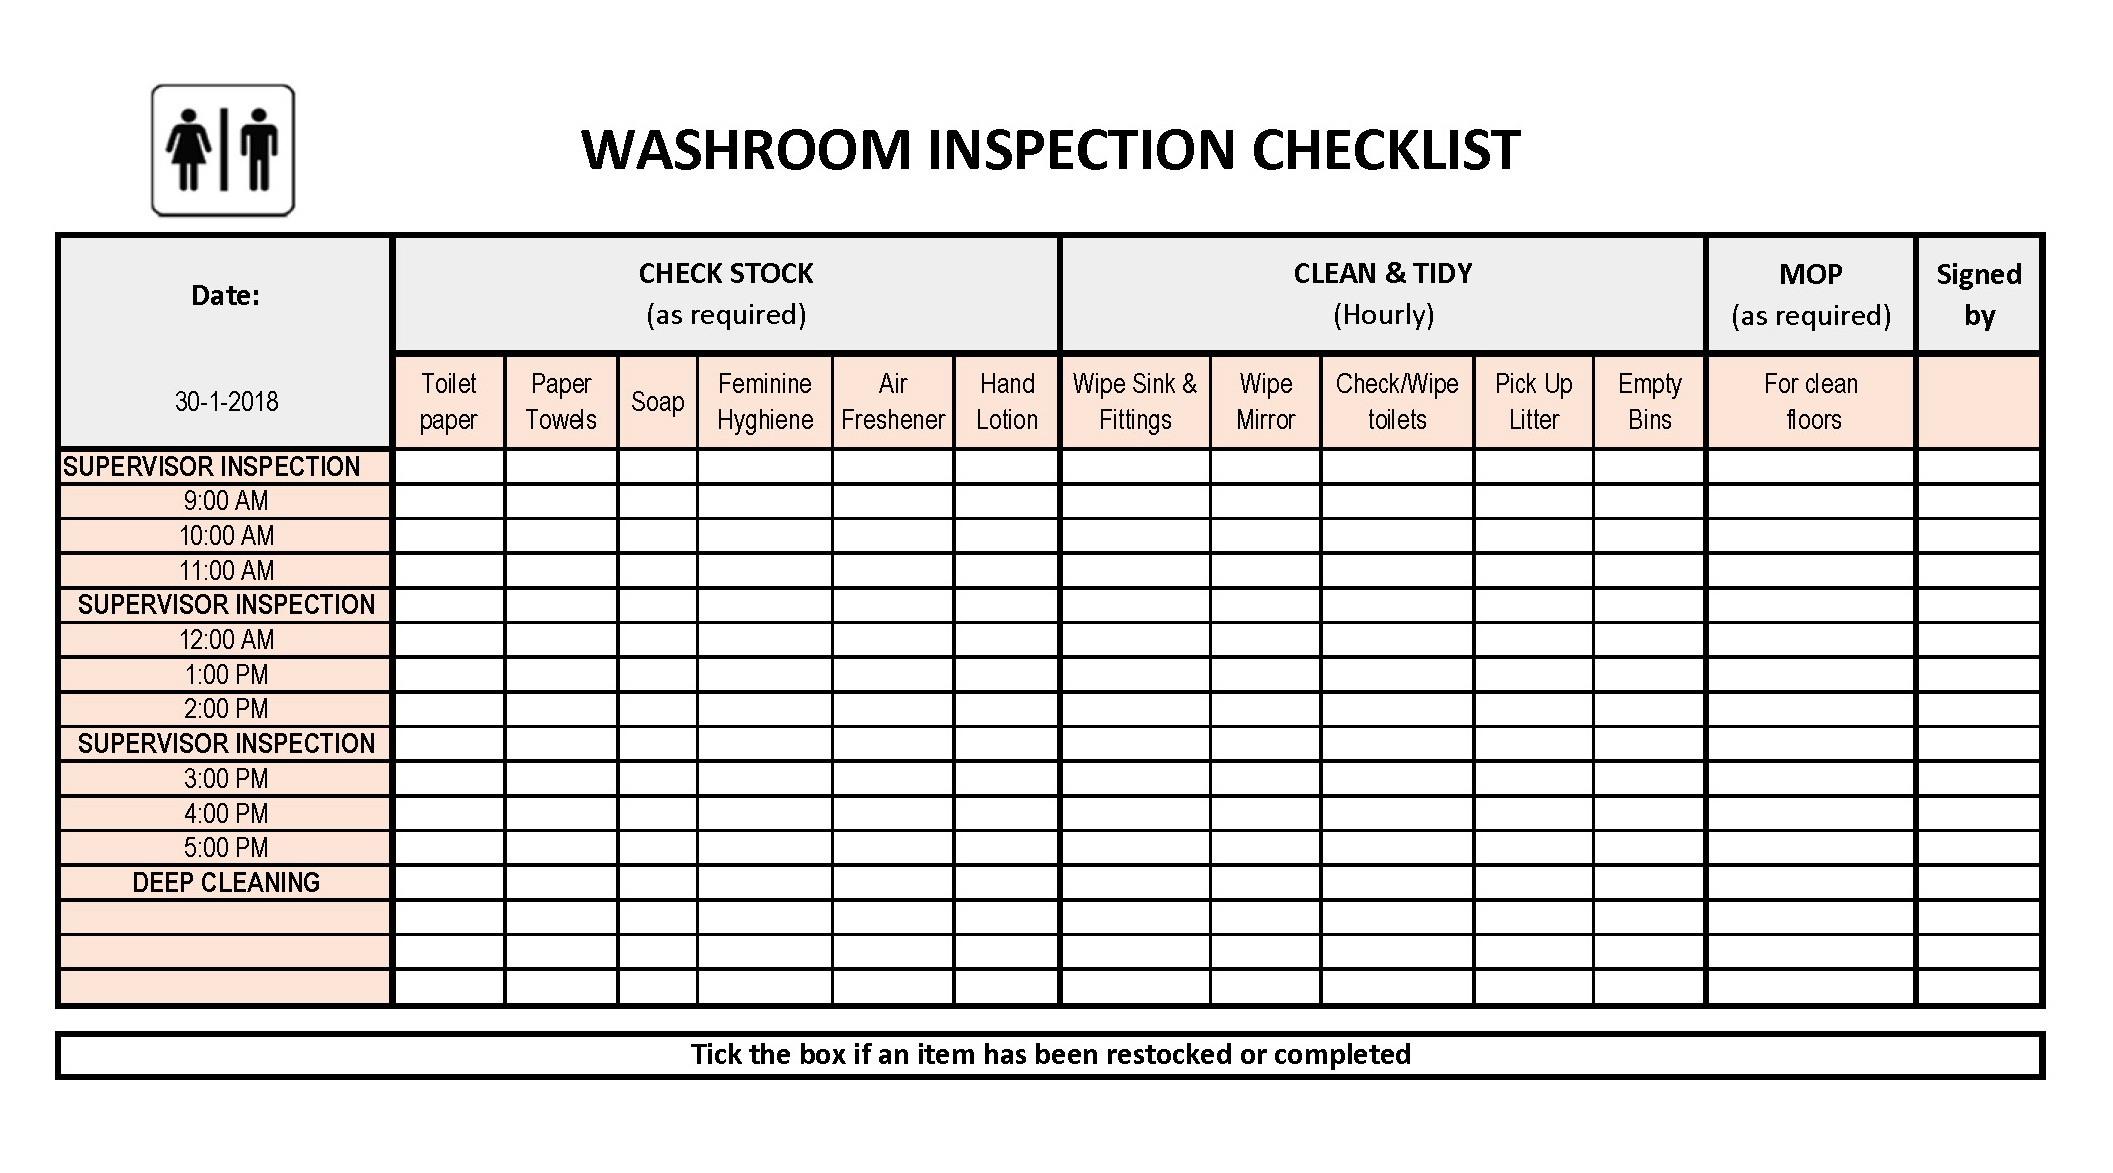 printable-bathroom-cleaning-checklist-template